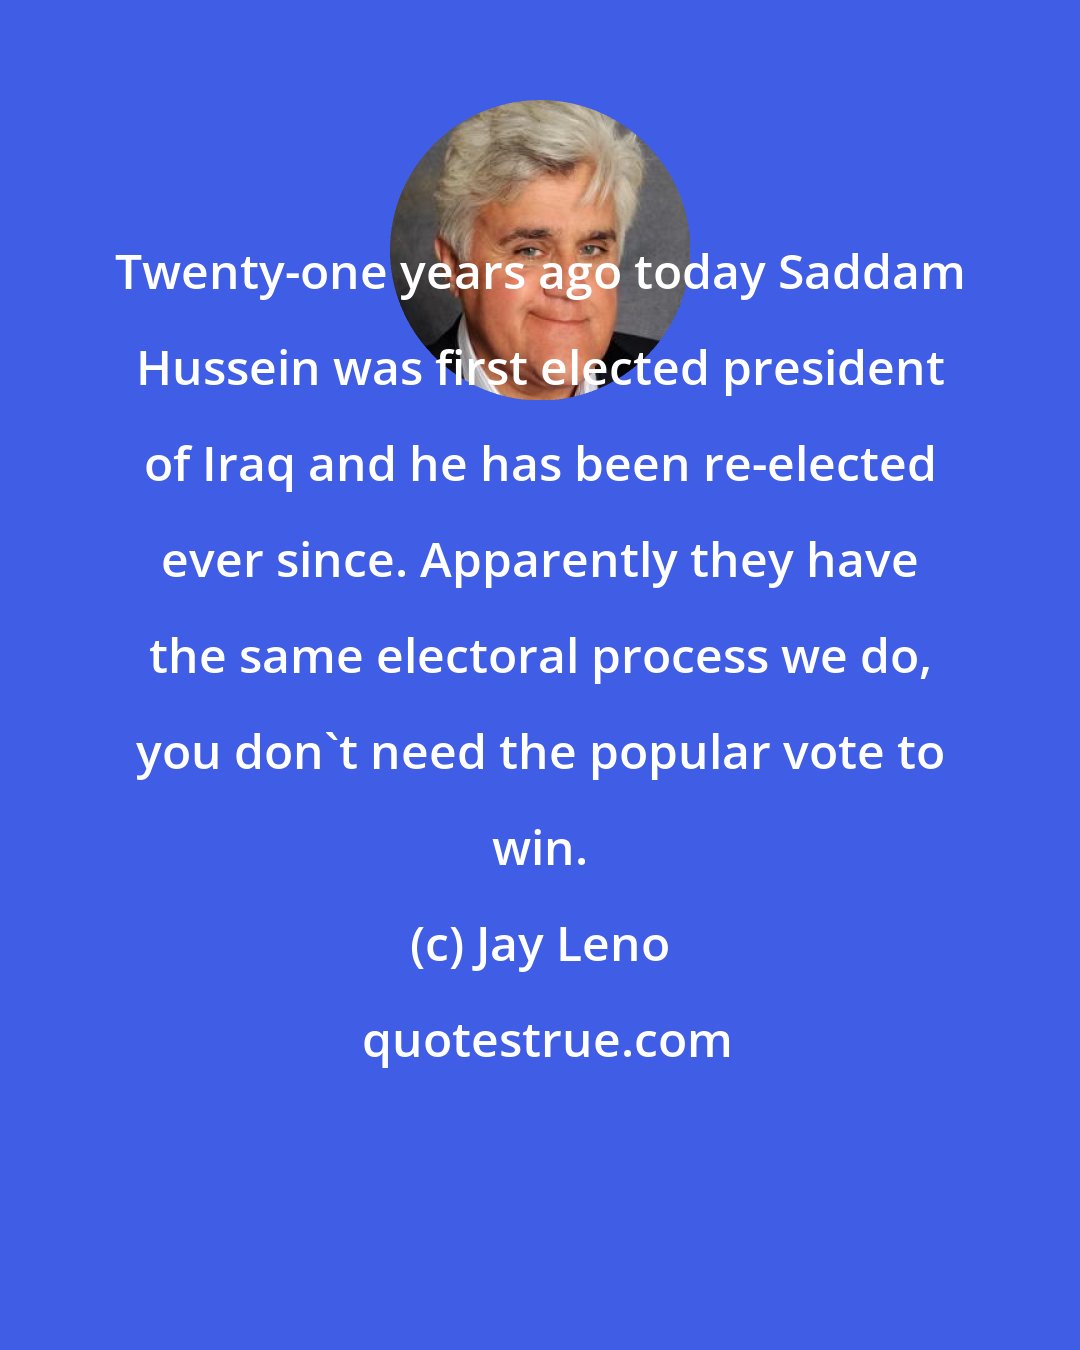 Jay Leno: Twenty-one years ago today Saddam Hussein was first elected president of Iraq and he has been re-elected ever since. Apparently they have the same electoral process we do, you don't need the popular vote to win.